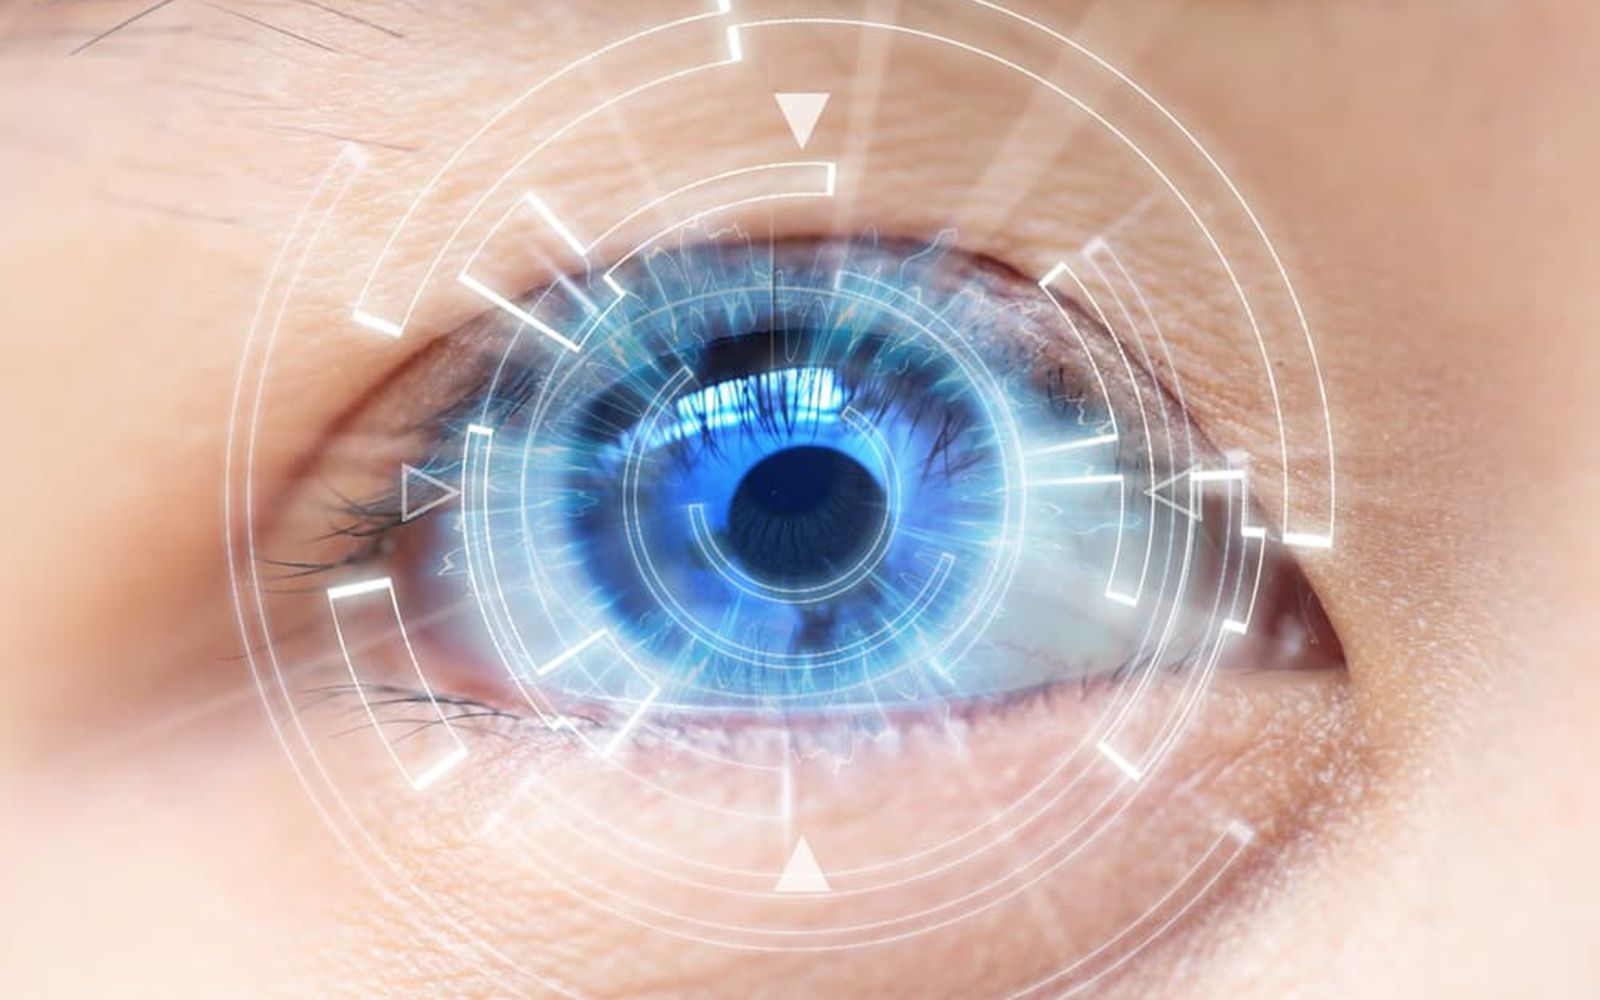 sony smart contact lens will record everything you see with the blink of an eye image 1